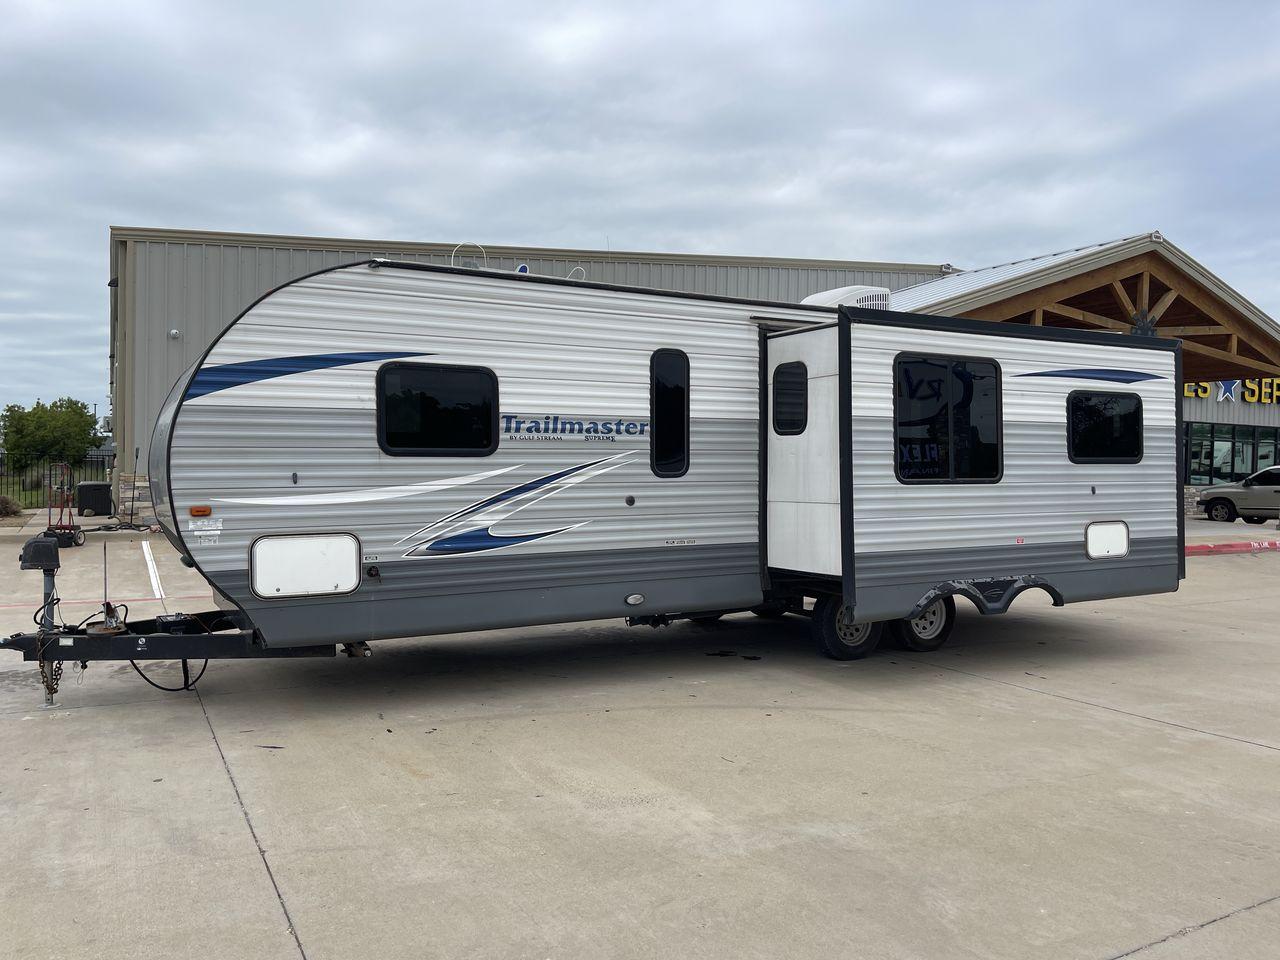 2018 GULFSTREAM TRAILMASTER 262RLS (1NL1GTP2XJ1) , Length: 31.25 ft. | Dry Weight: 6,849 lbs. | Slides: 1 transmission, located at 4319 N Main St, Cleburne, TX, 76033, (817) 678-5133, 32.385960, -97.391212 - This 2018 Gulf Stream Trailmaster 262RLS travel trailer measures just over 31' in length. It is a dual axle, steel wheel setup with a dry weight of 6,849 lbs and a carrying capacity of 1,421 lbs. With a dry weight of 6,849 lbs., the Trailmaster 262RLS offers easy maneuverability without compromising - Photo #21